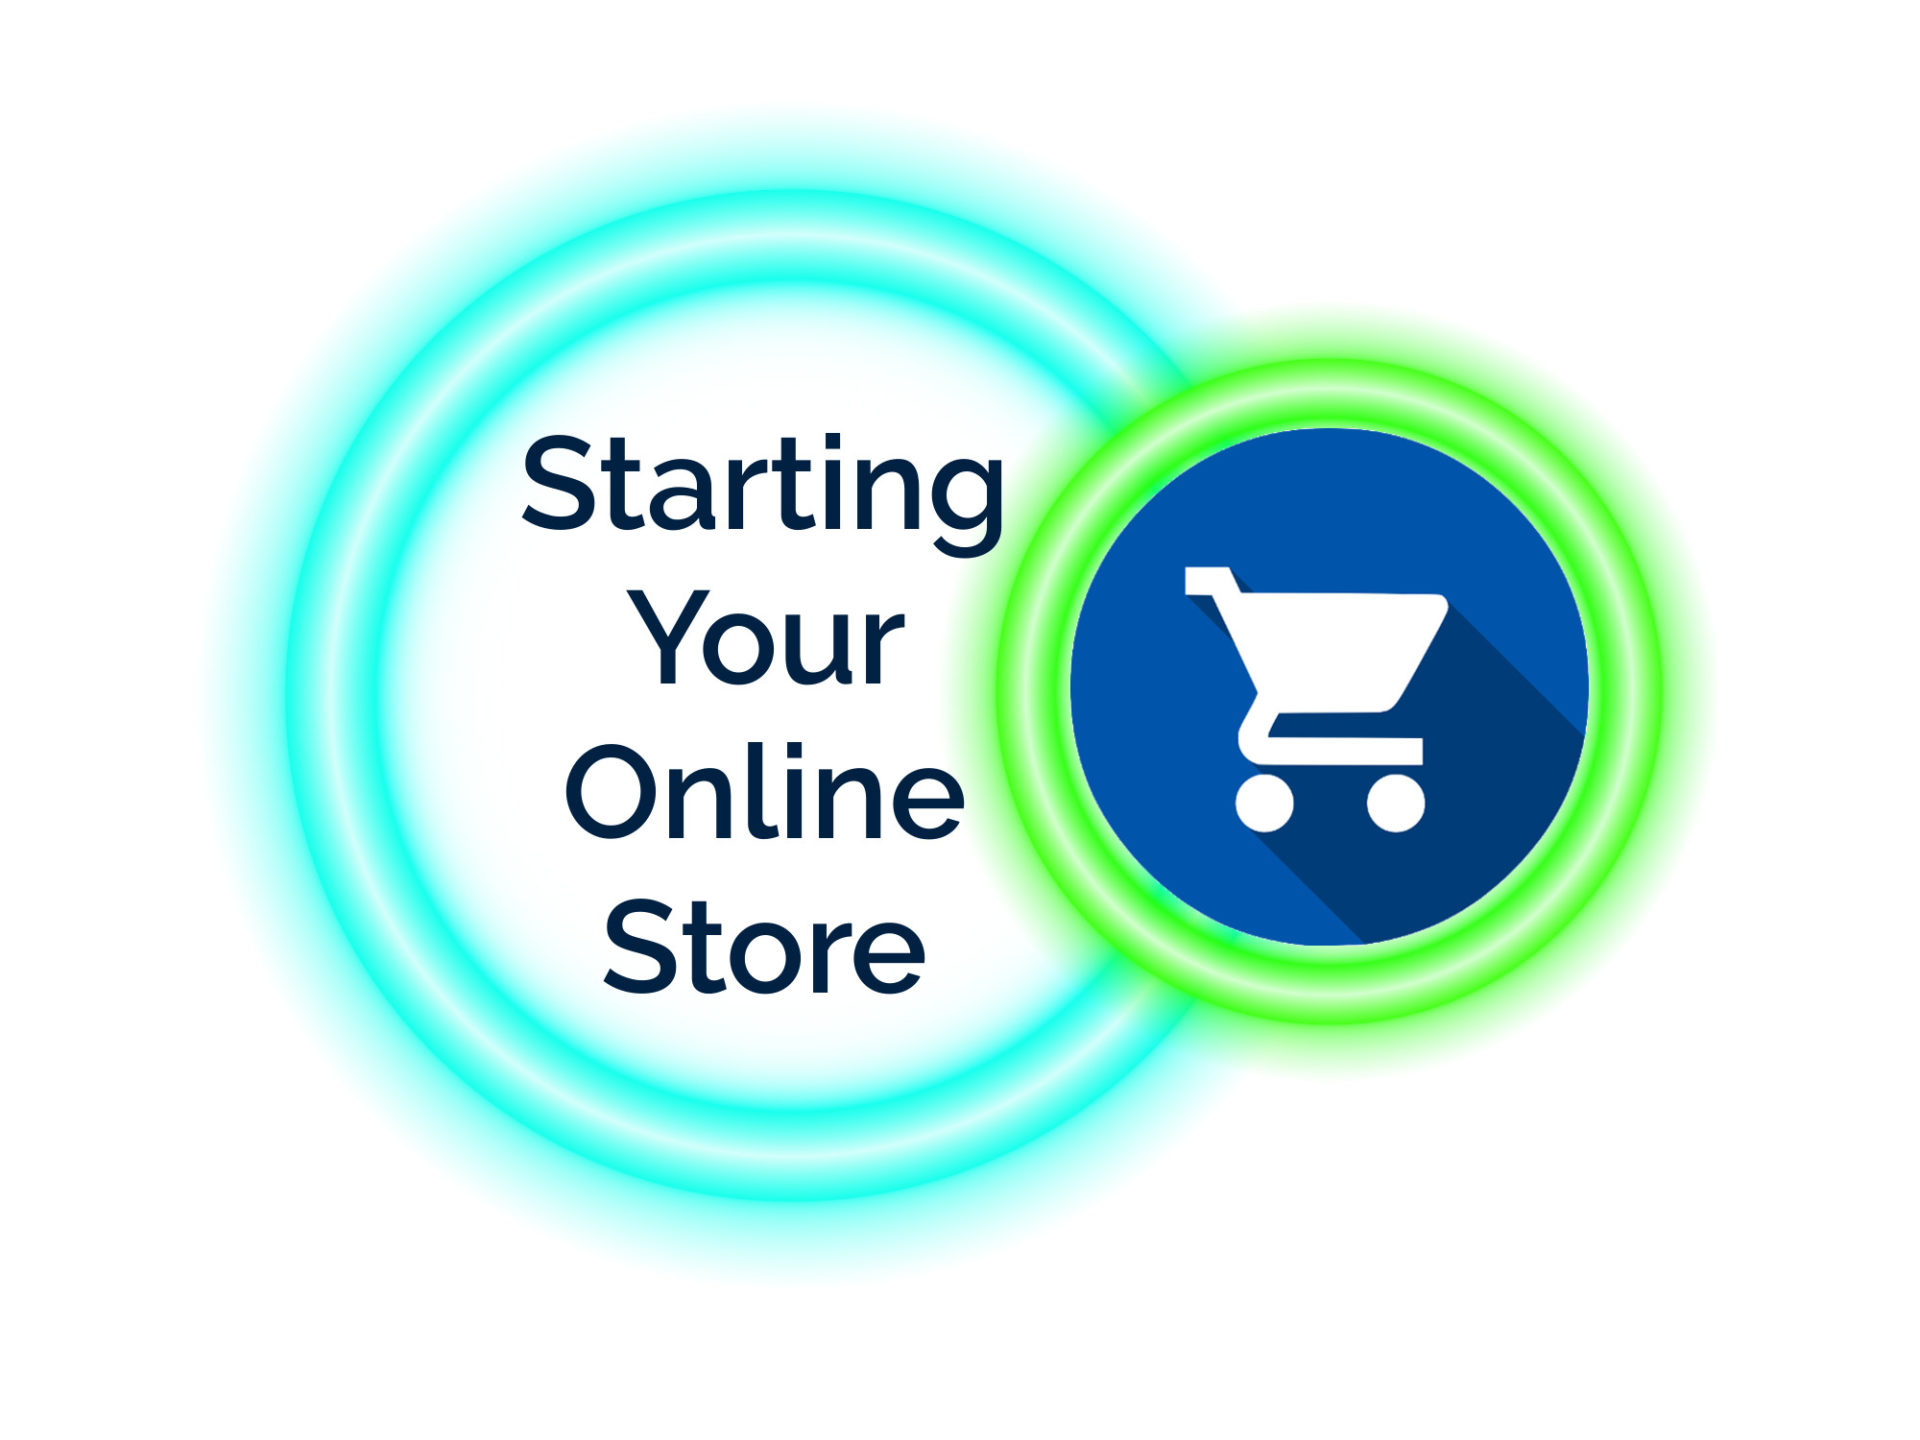 Starting Your Online Store